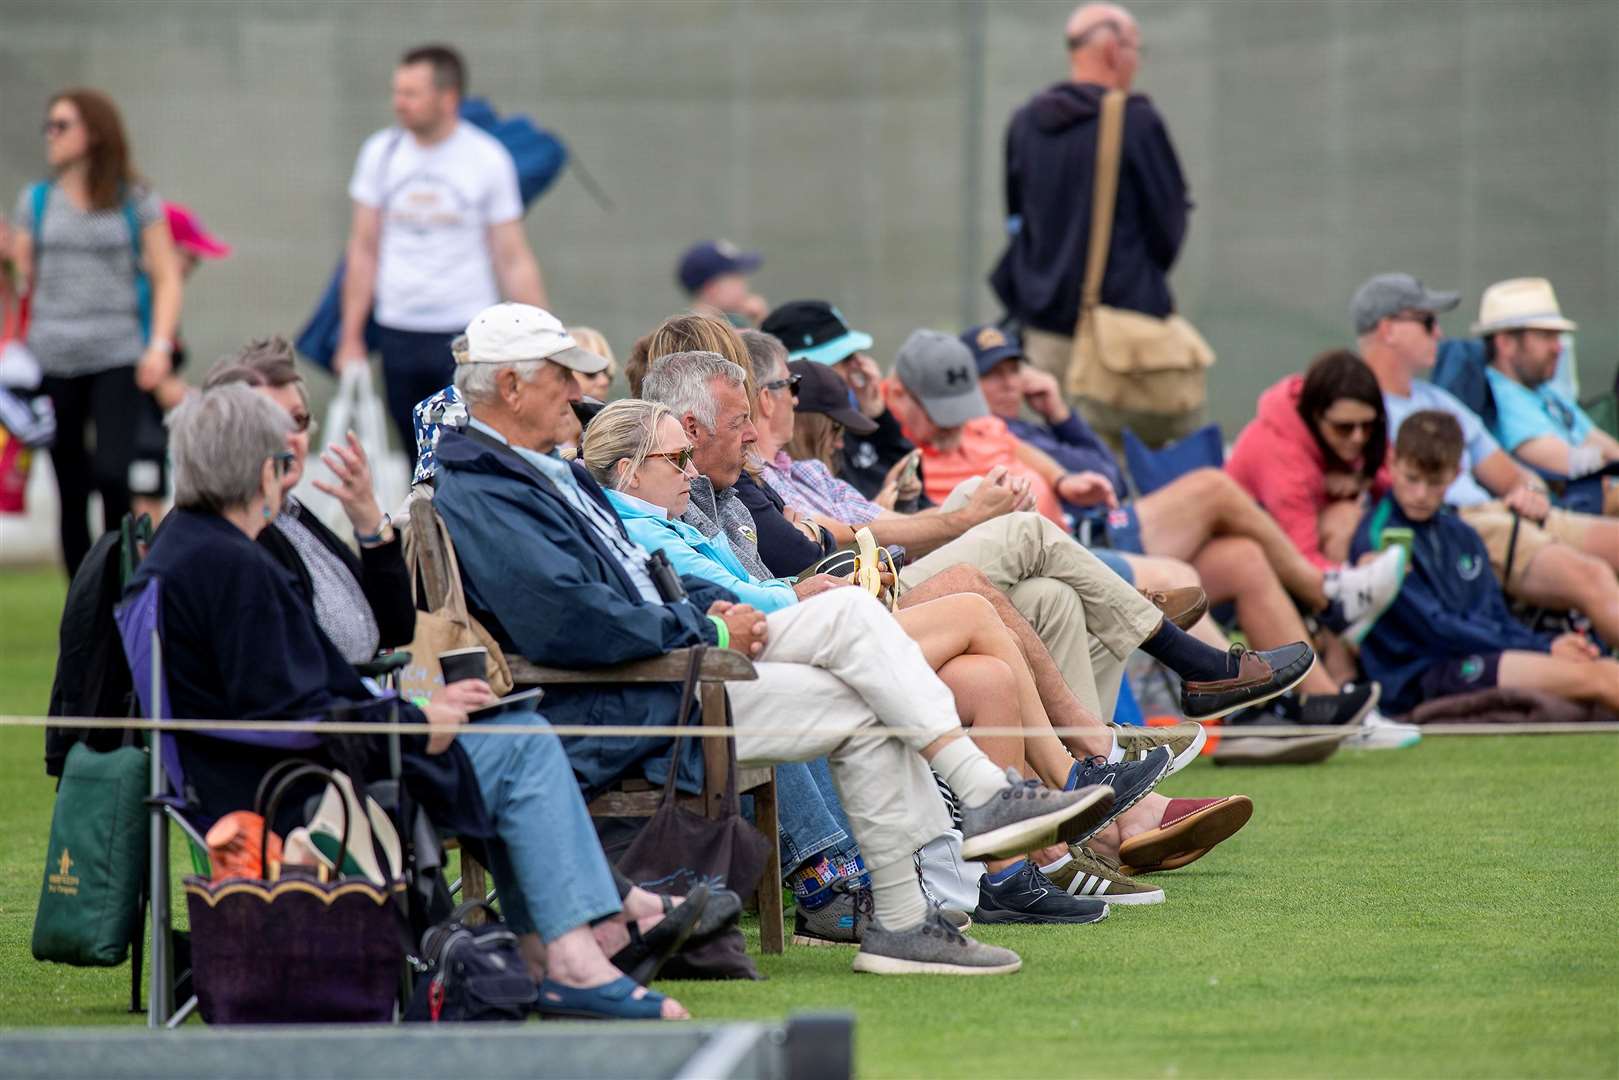 Despite the non-summer conditions there was still a good turnout at Woolpit Cricket Club on Sunday to see Suffolk go up against the reigning LV= Insurance county champions Surrey in a 50-over contest showcase fixture that ended up being lost to rain Picture: Mark Westley